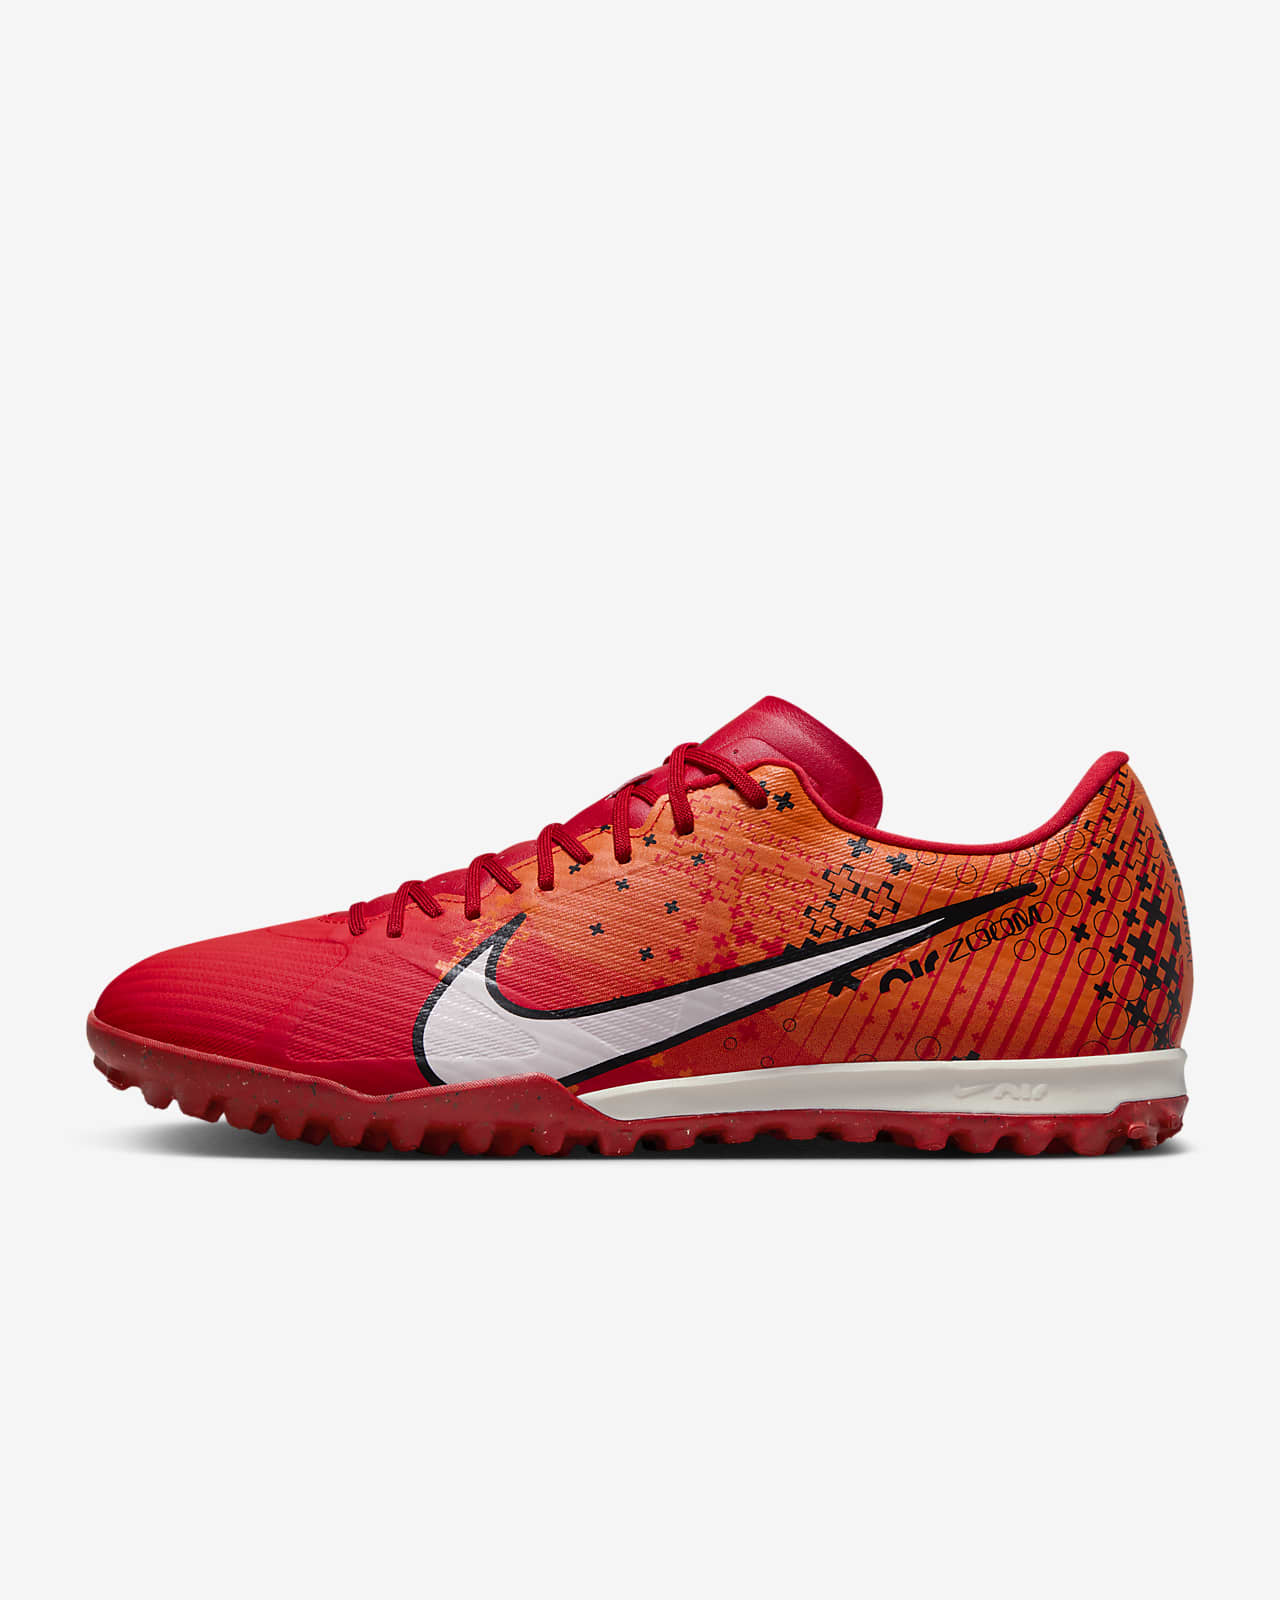 Nike Vapor 15 Academy Mercurial Dream Speed TF Low-Top Soccer Shoes